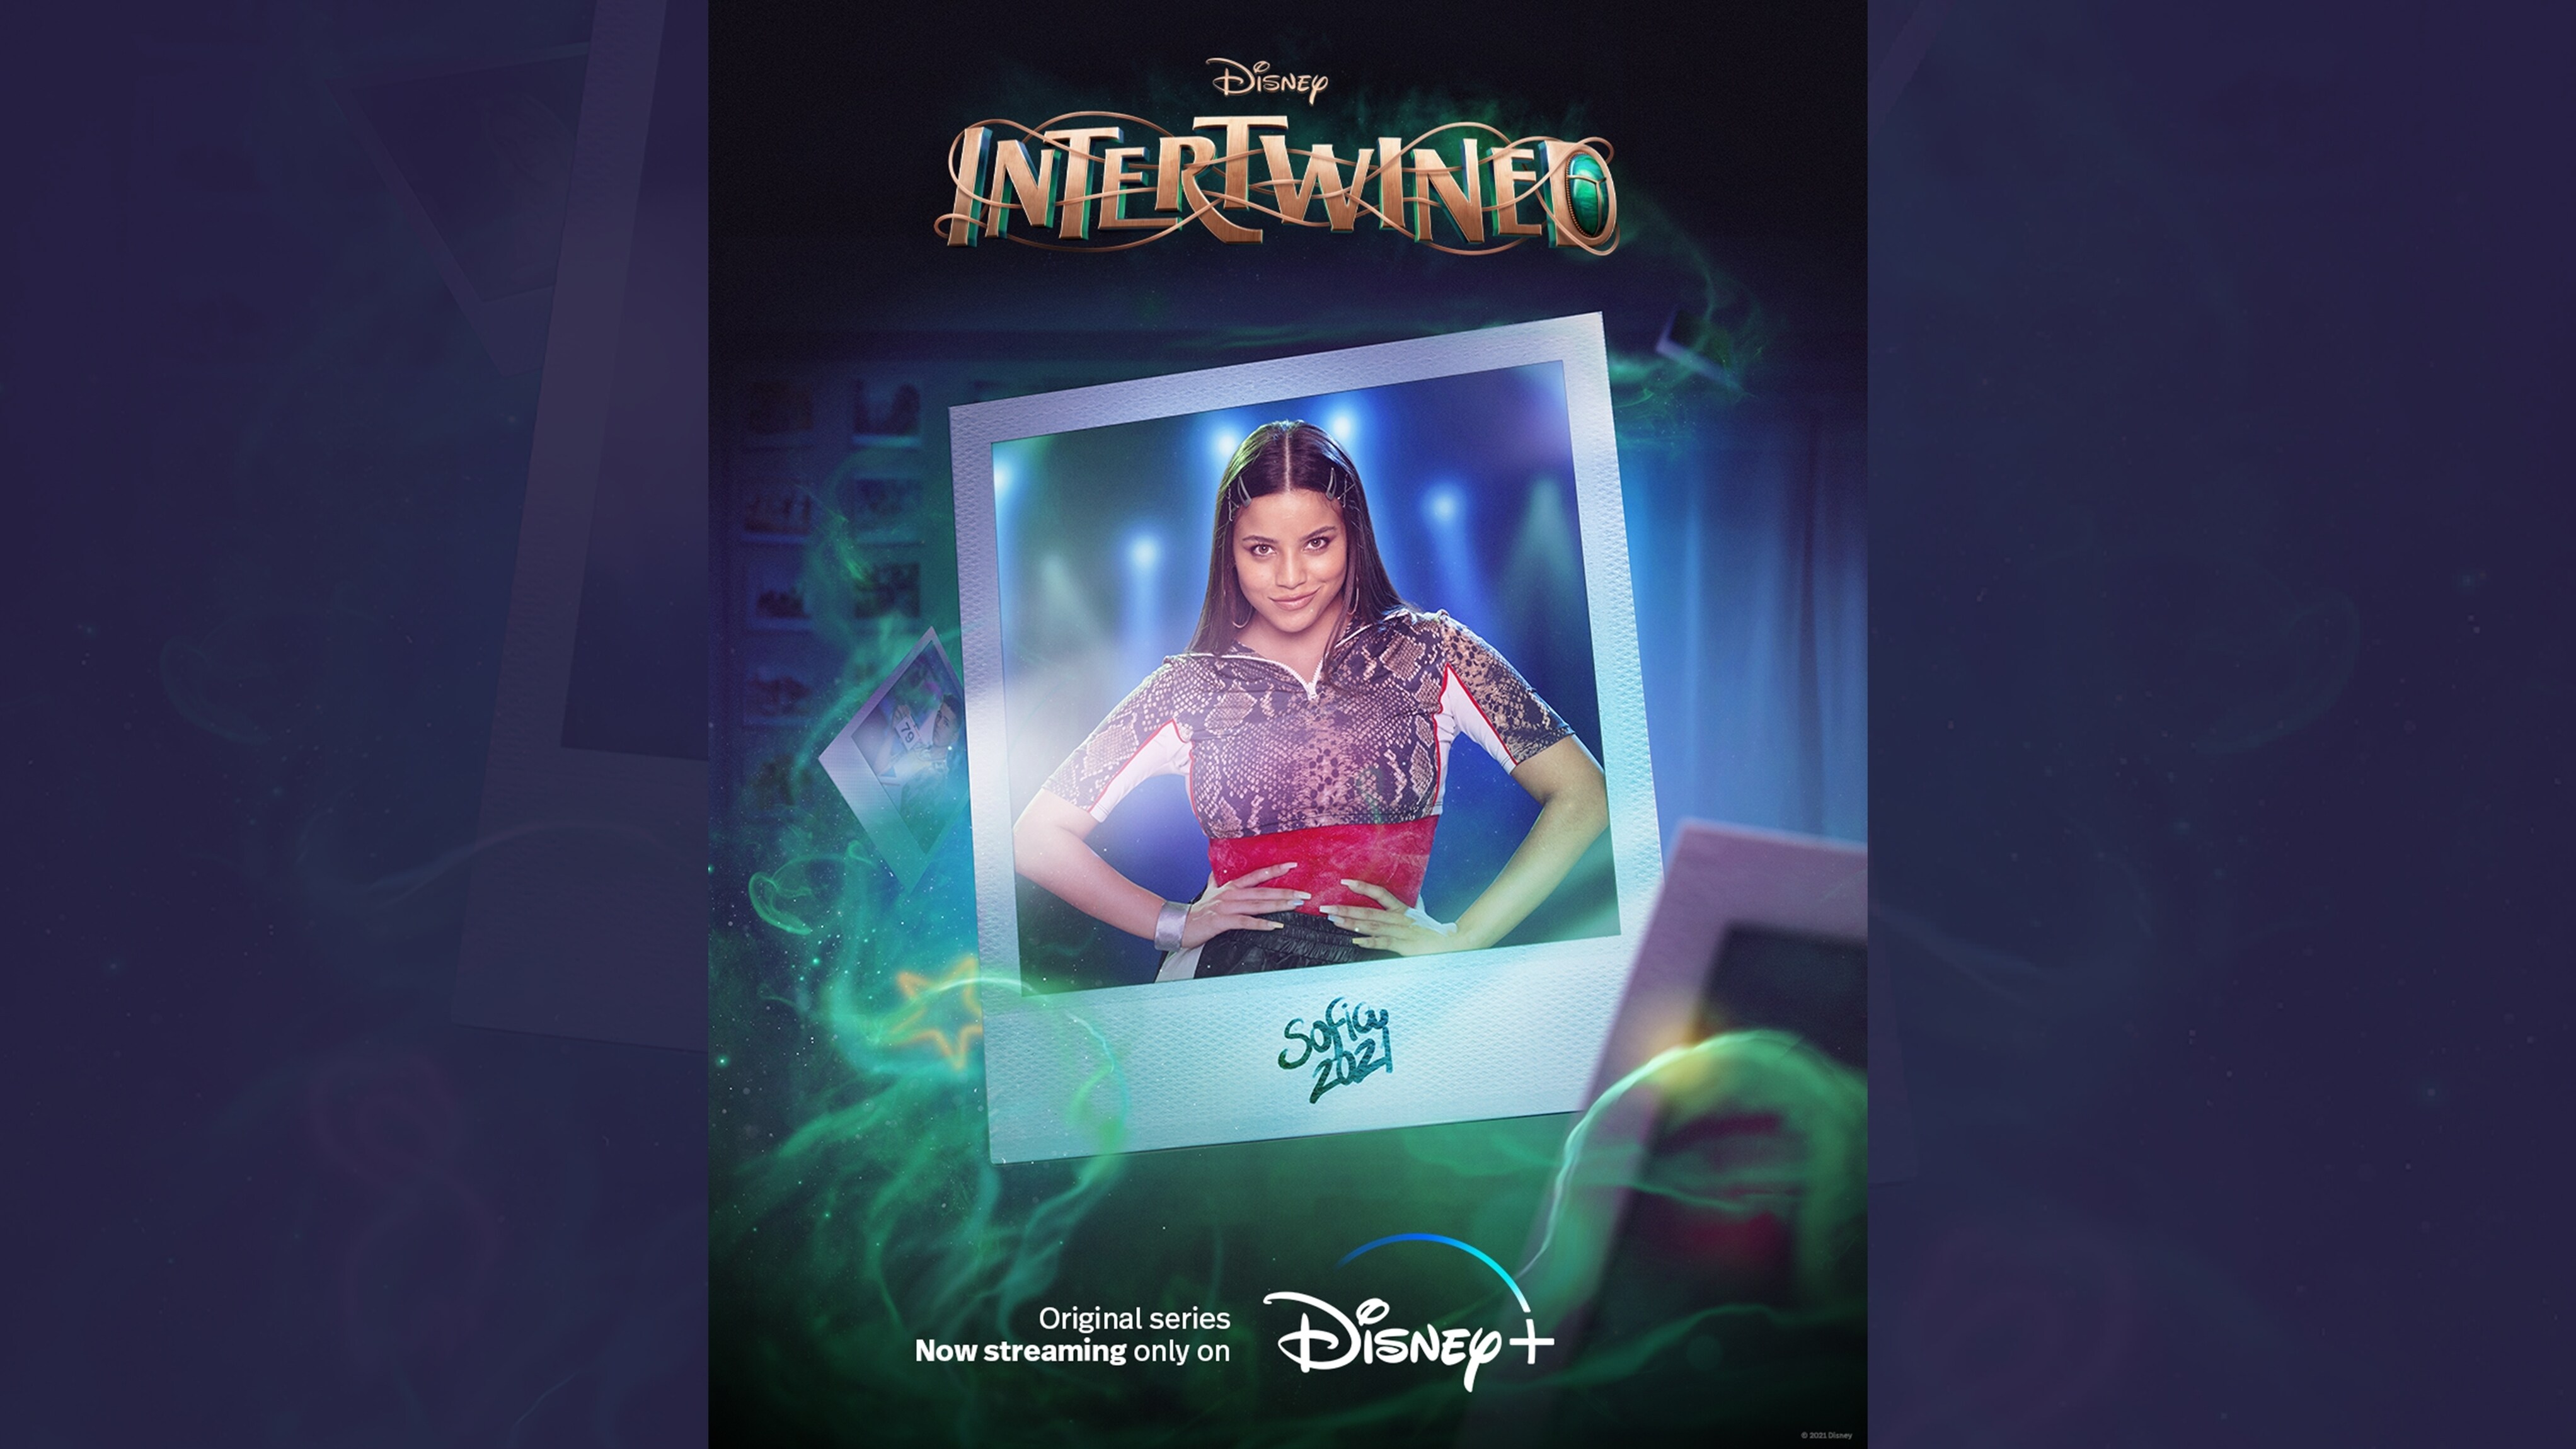 Disney | Intertwined | Sofia (2021) | Original series now streaming only on Disney+